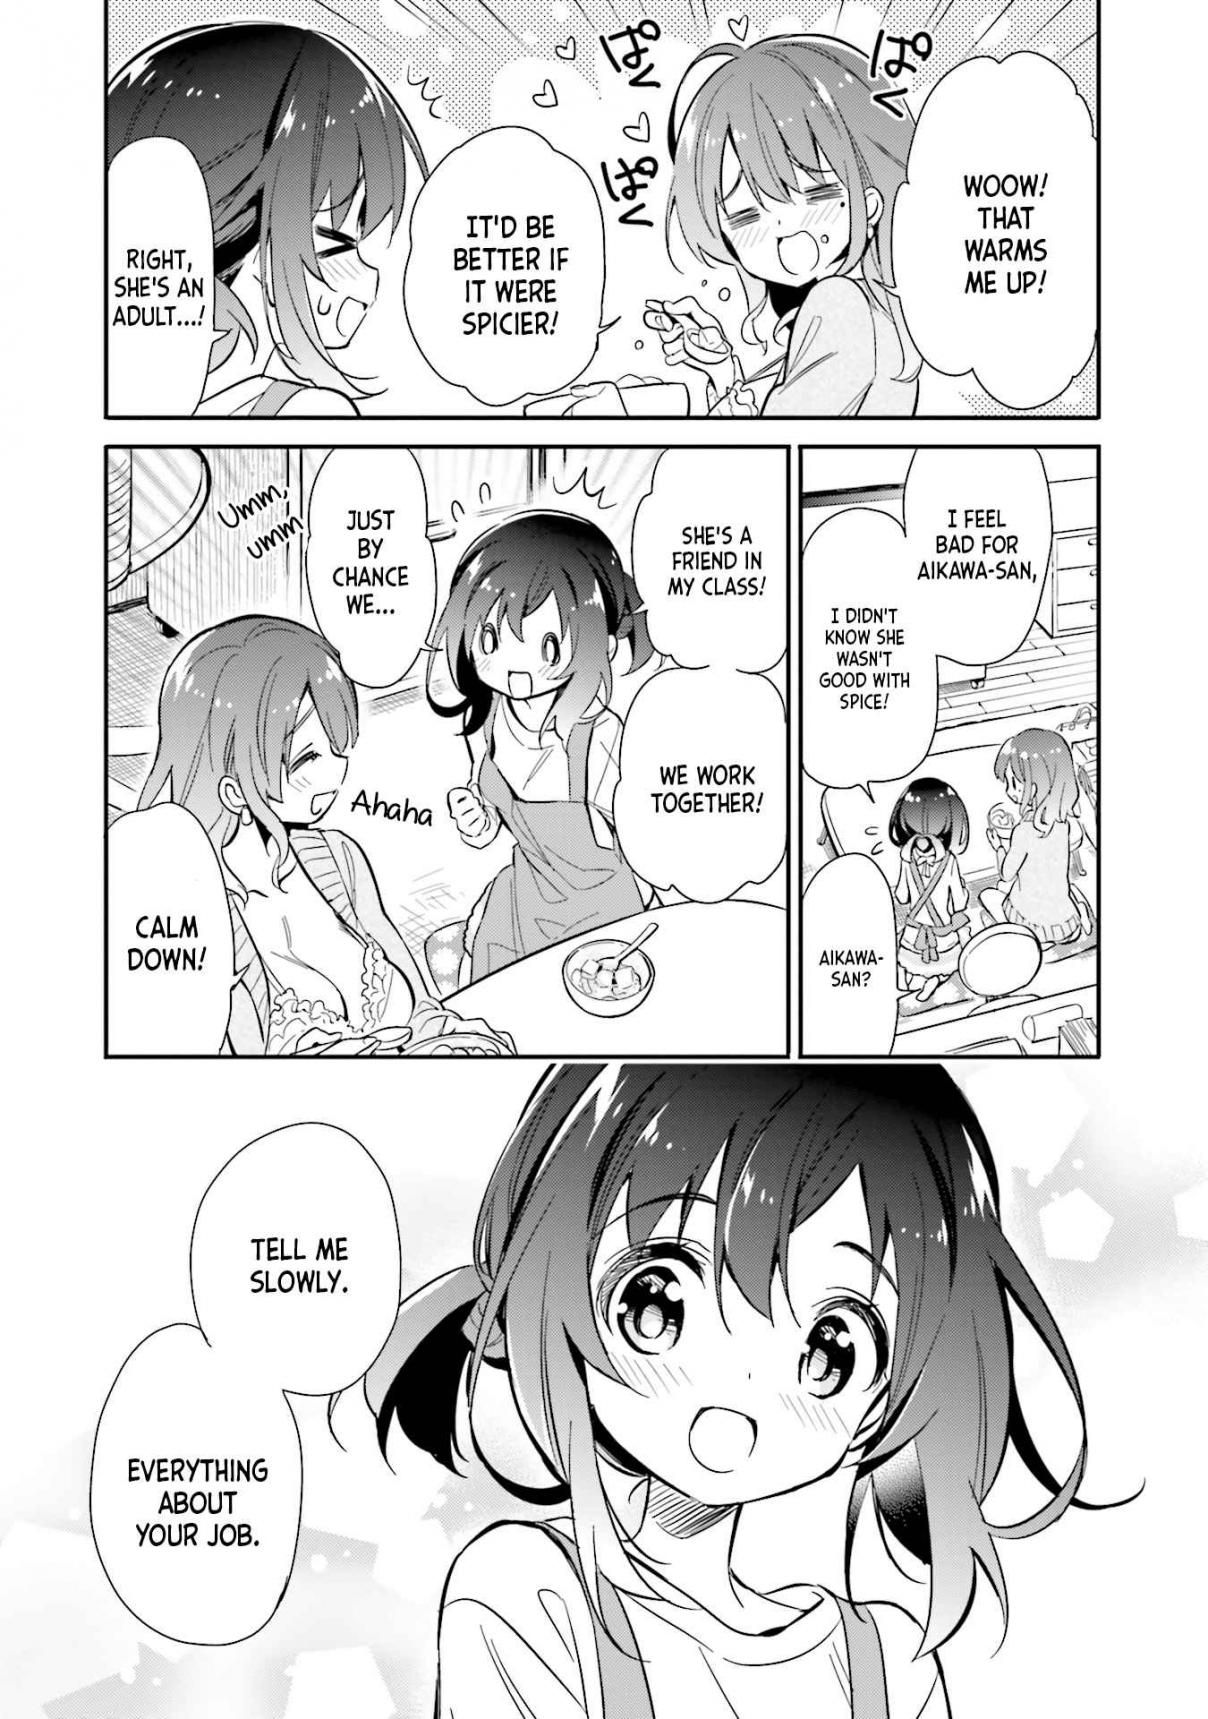 Chotto Ippai! Vol. 3 Ch. 18 That which connects us